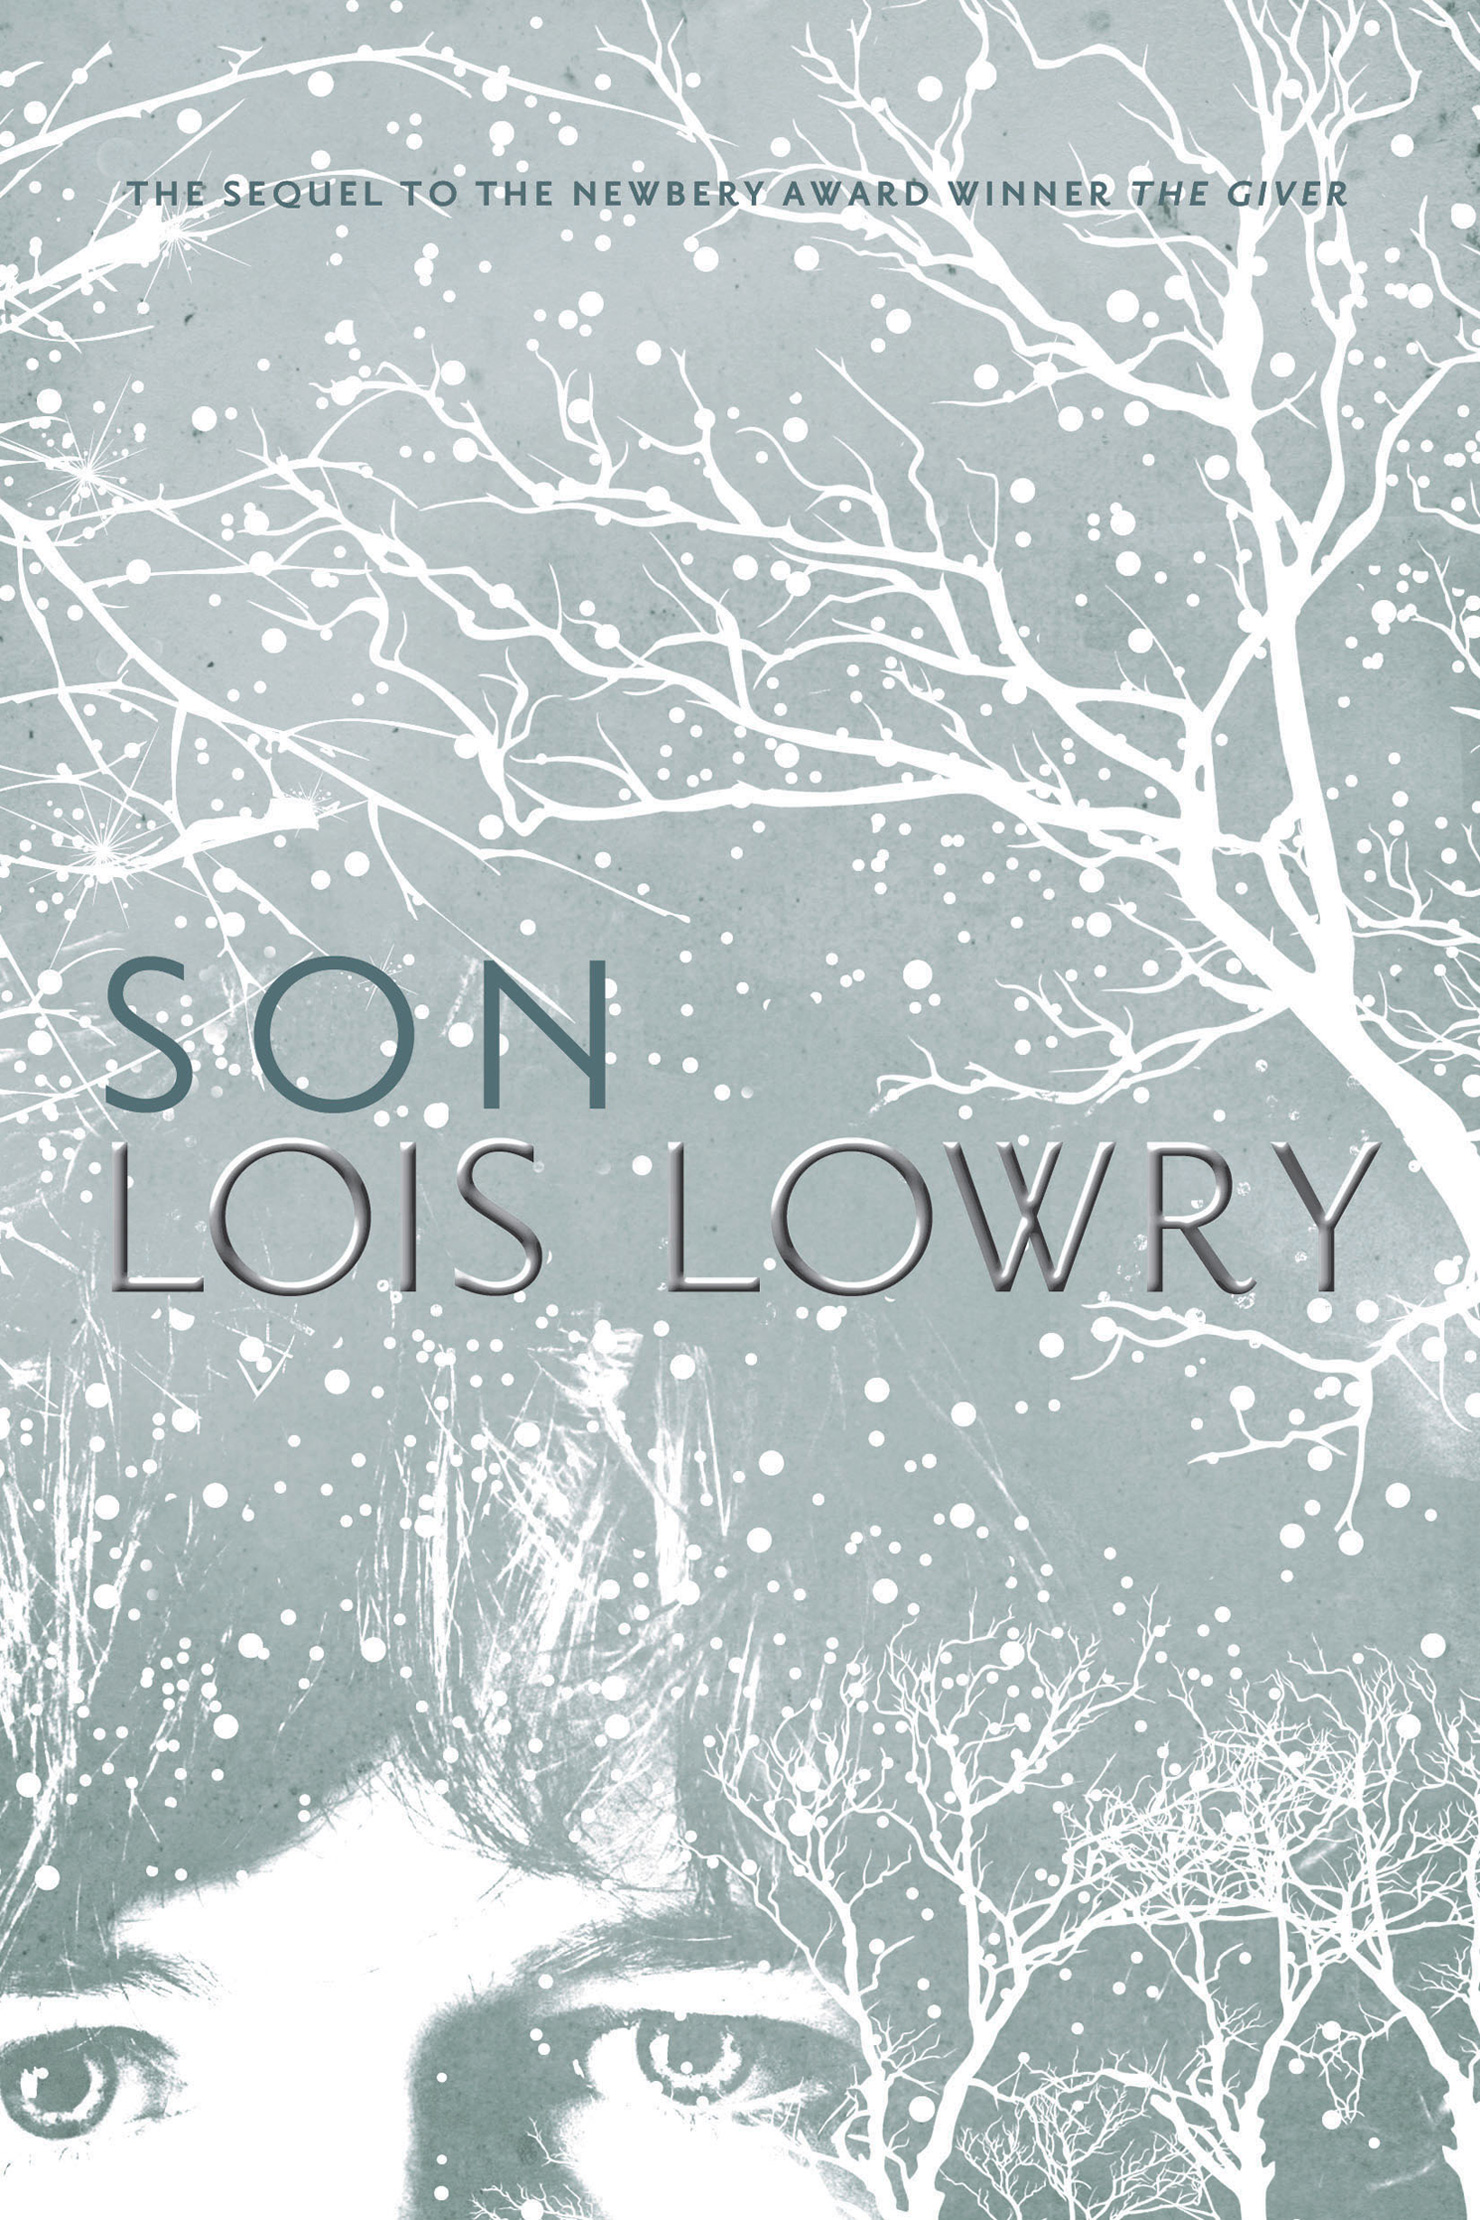 Lois Lowry: Son (Paperback, 2014, Clarion Books)